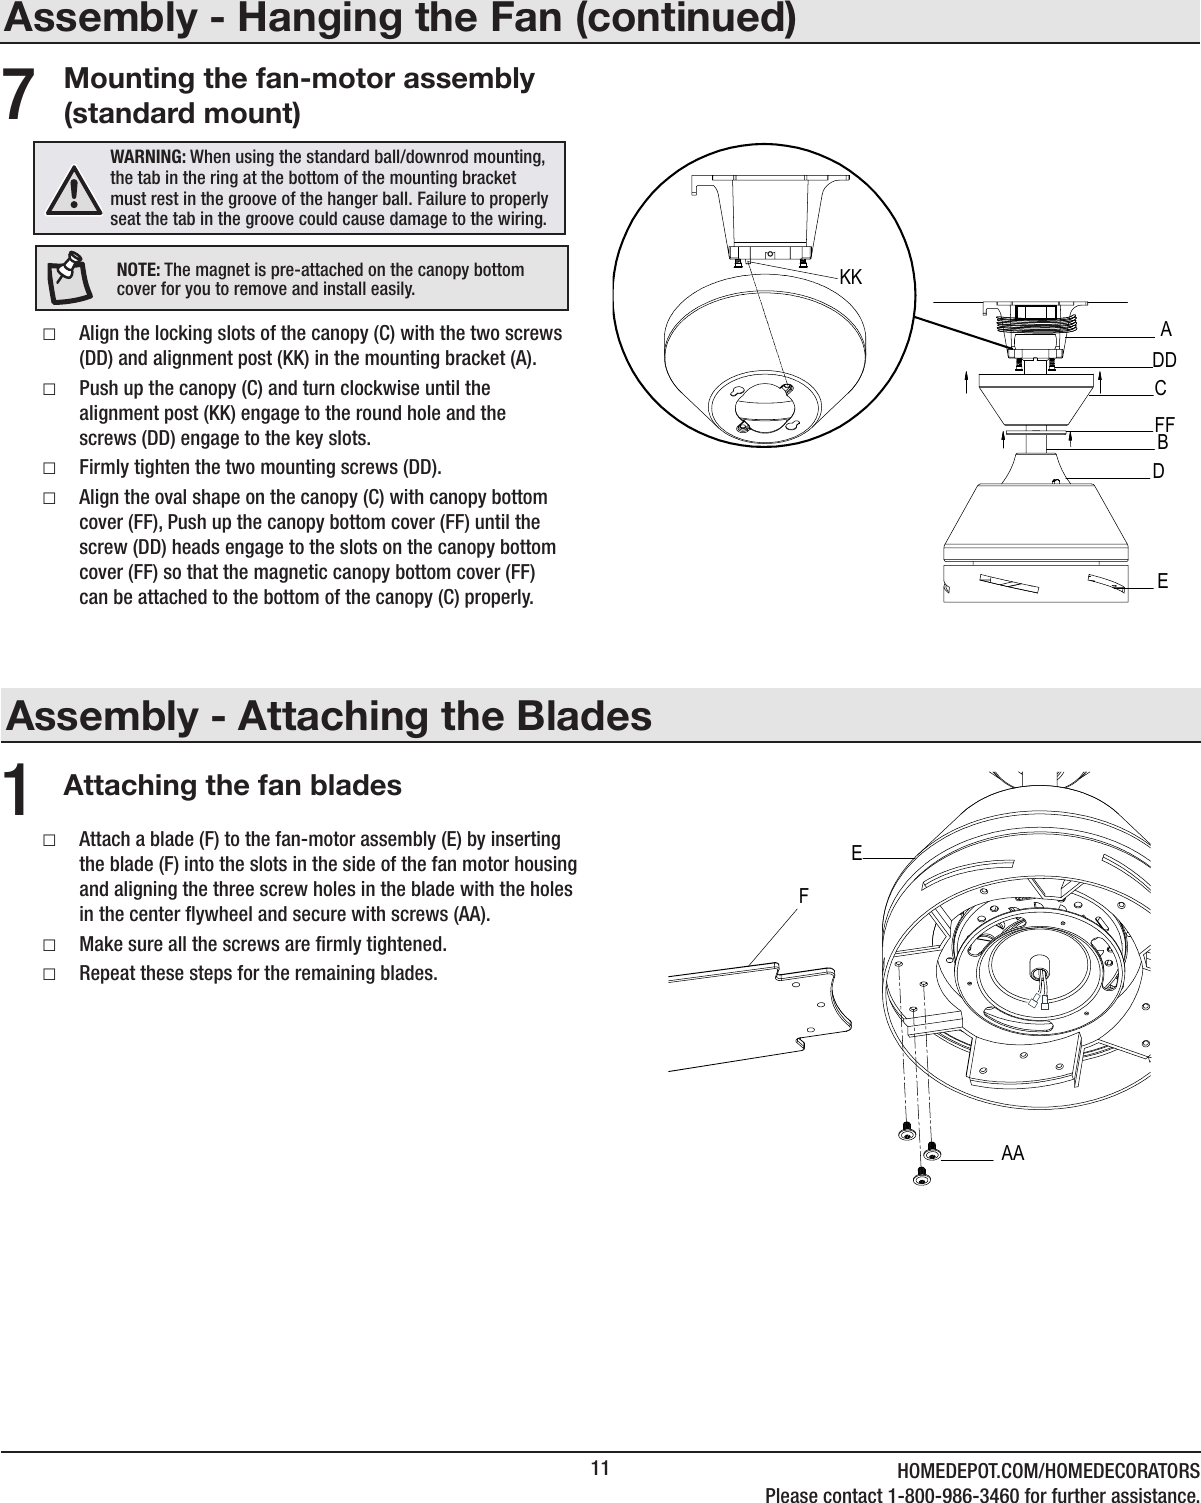 Page 11 of King of Fans 52VENDD-1 52 inch Vendome User Manual 